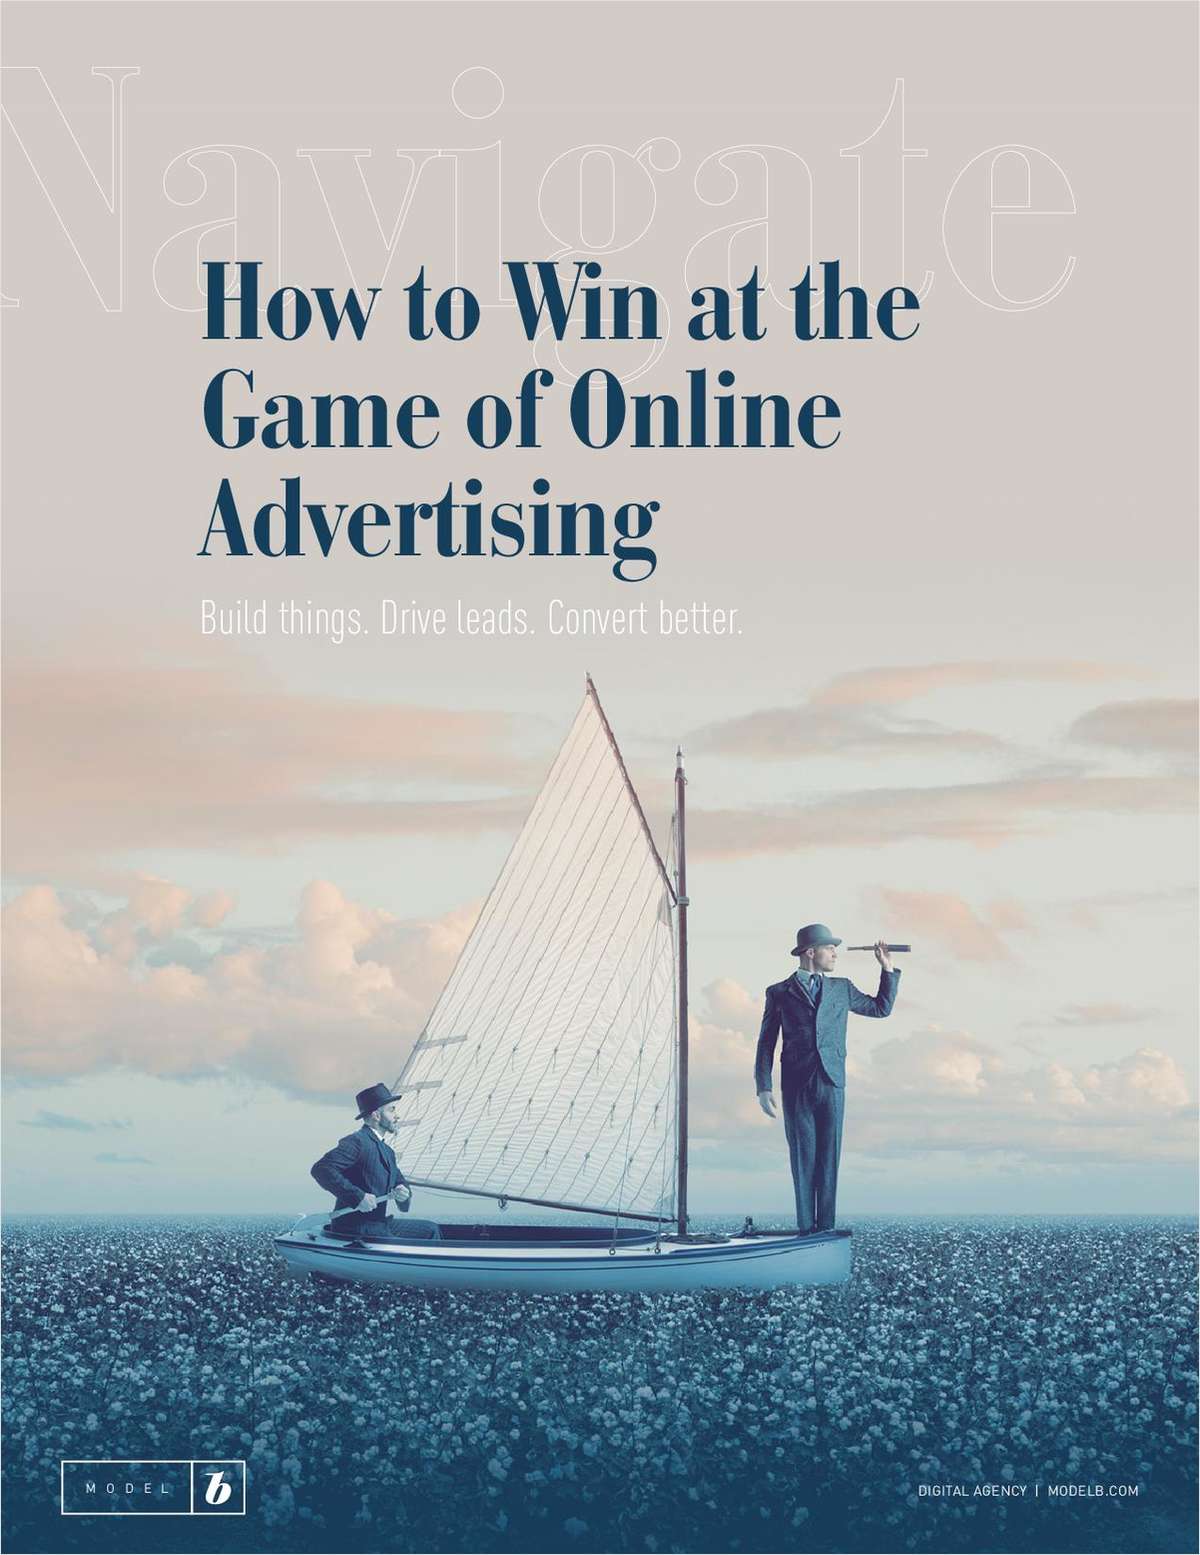 How to Win at the Game of Online Advertising